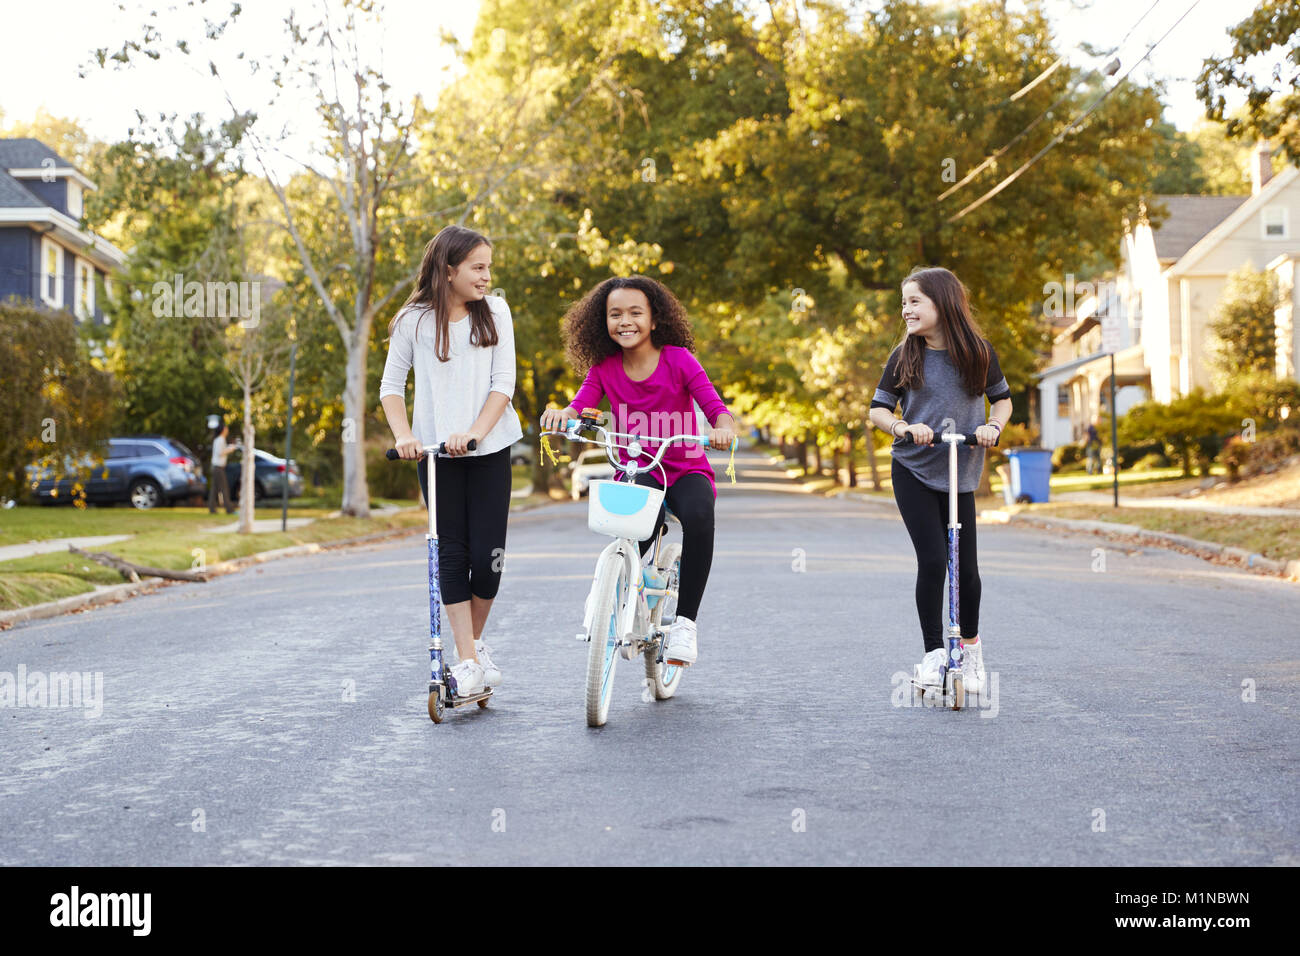 Three pre-teen girls riding in street on scooters and a bike Stock Photo